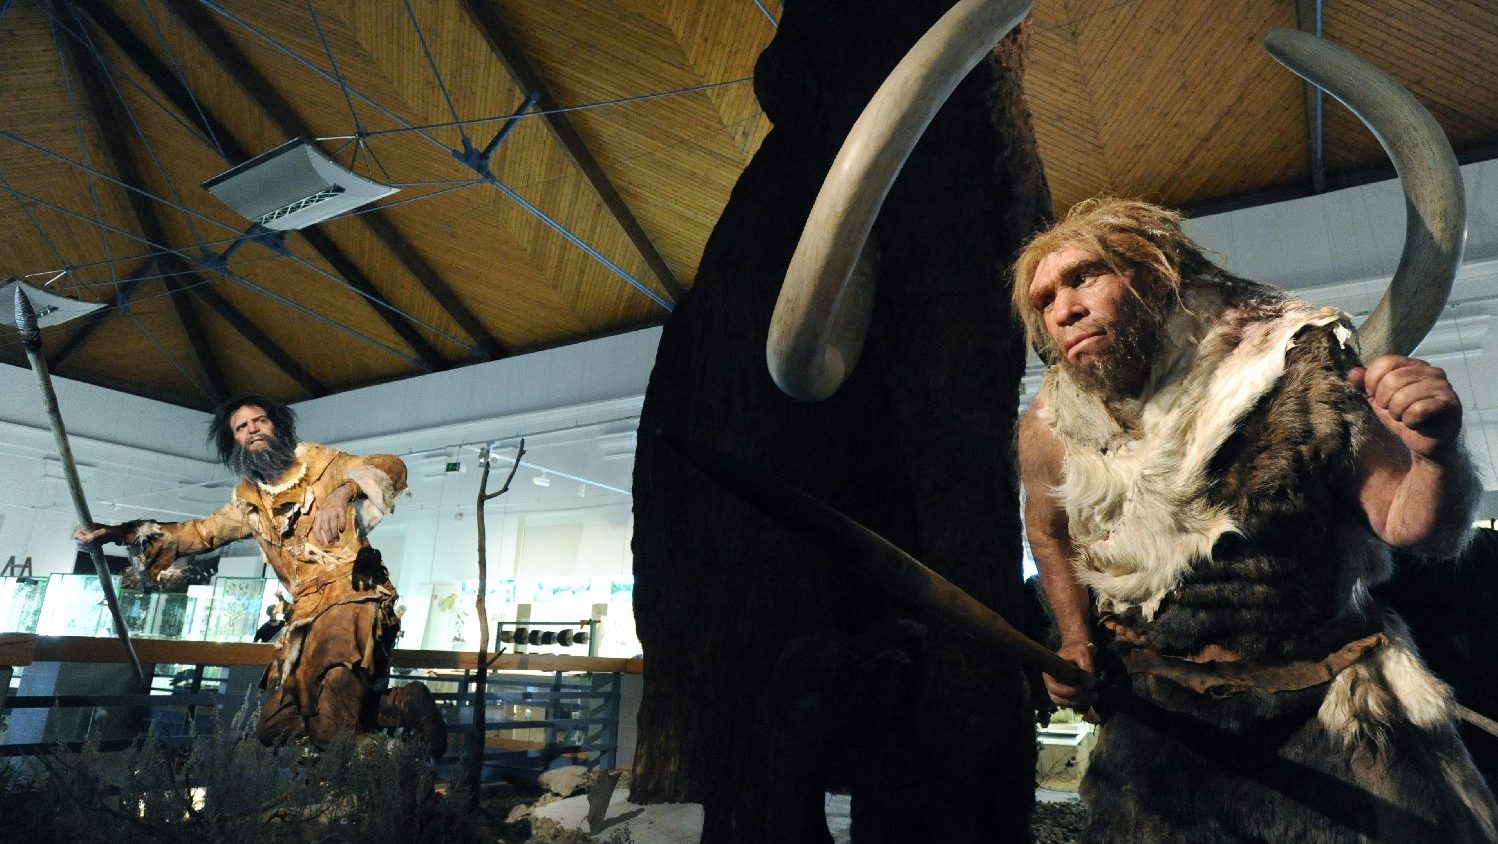 Earth's magnetic pole shift may have played a role in the extinction of Neanderthals